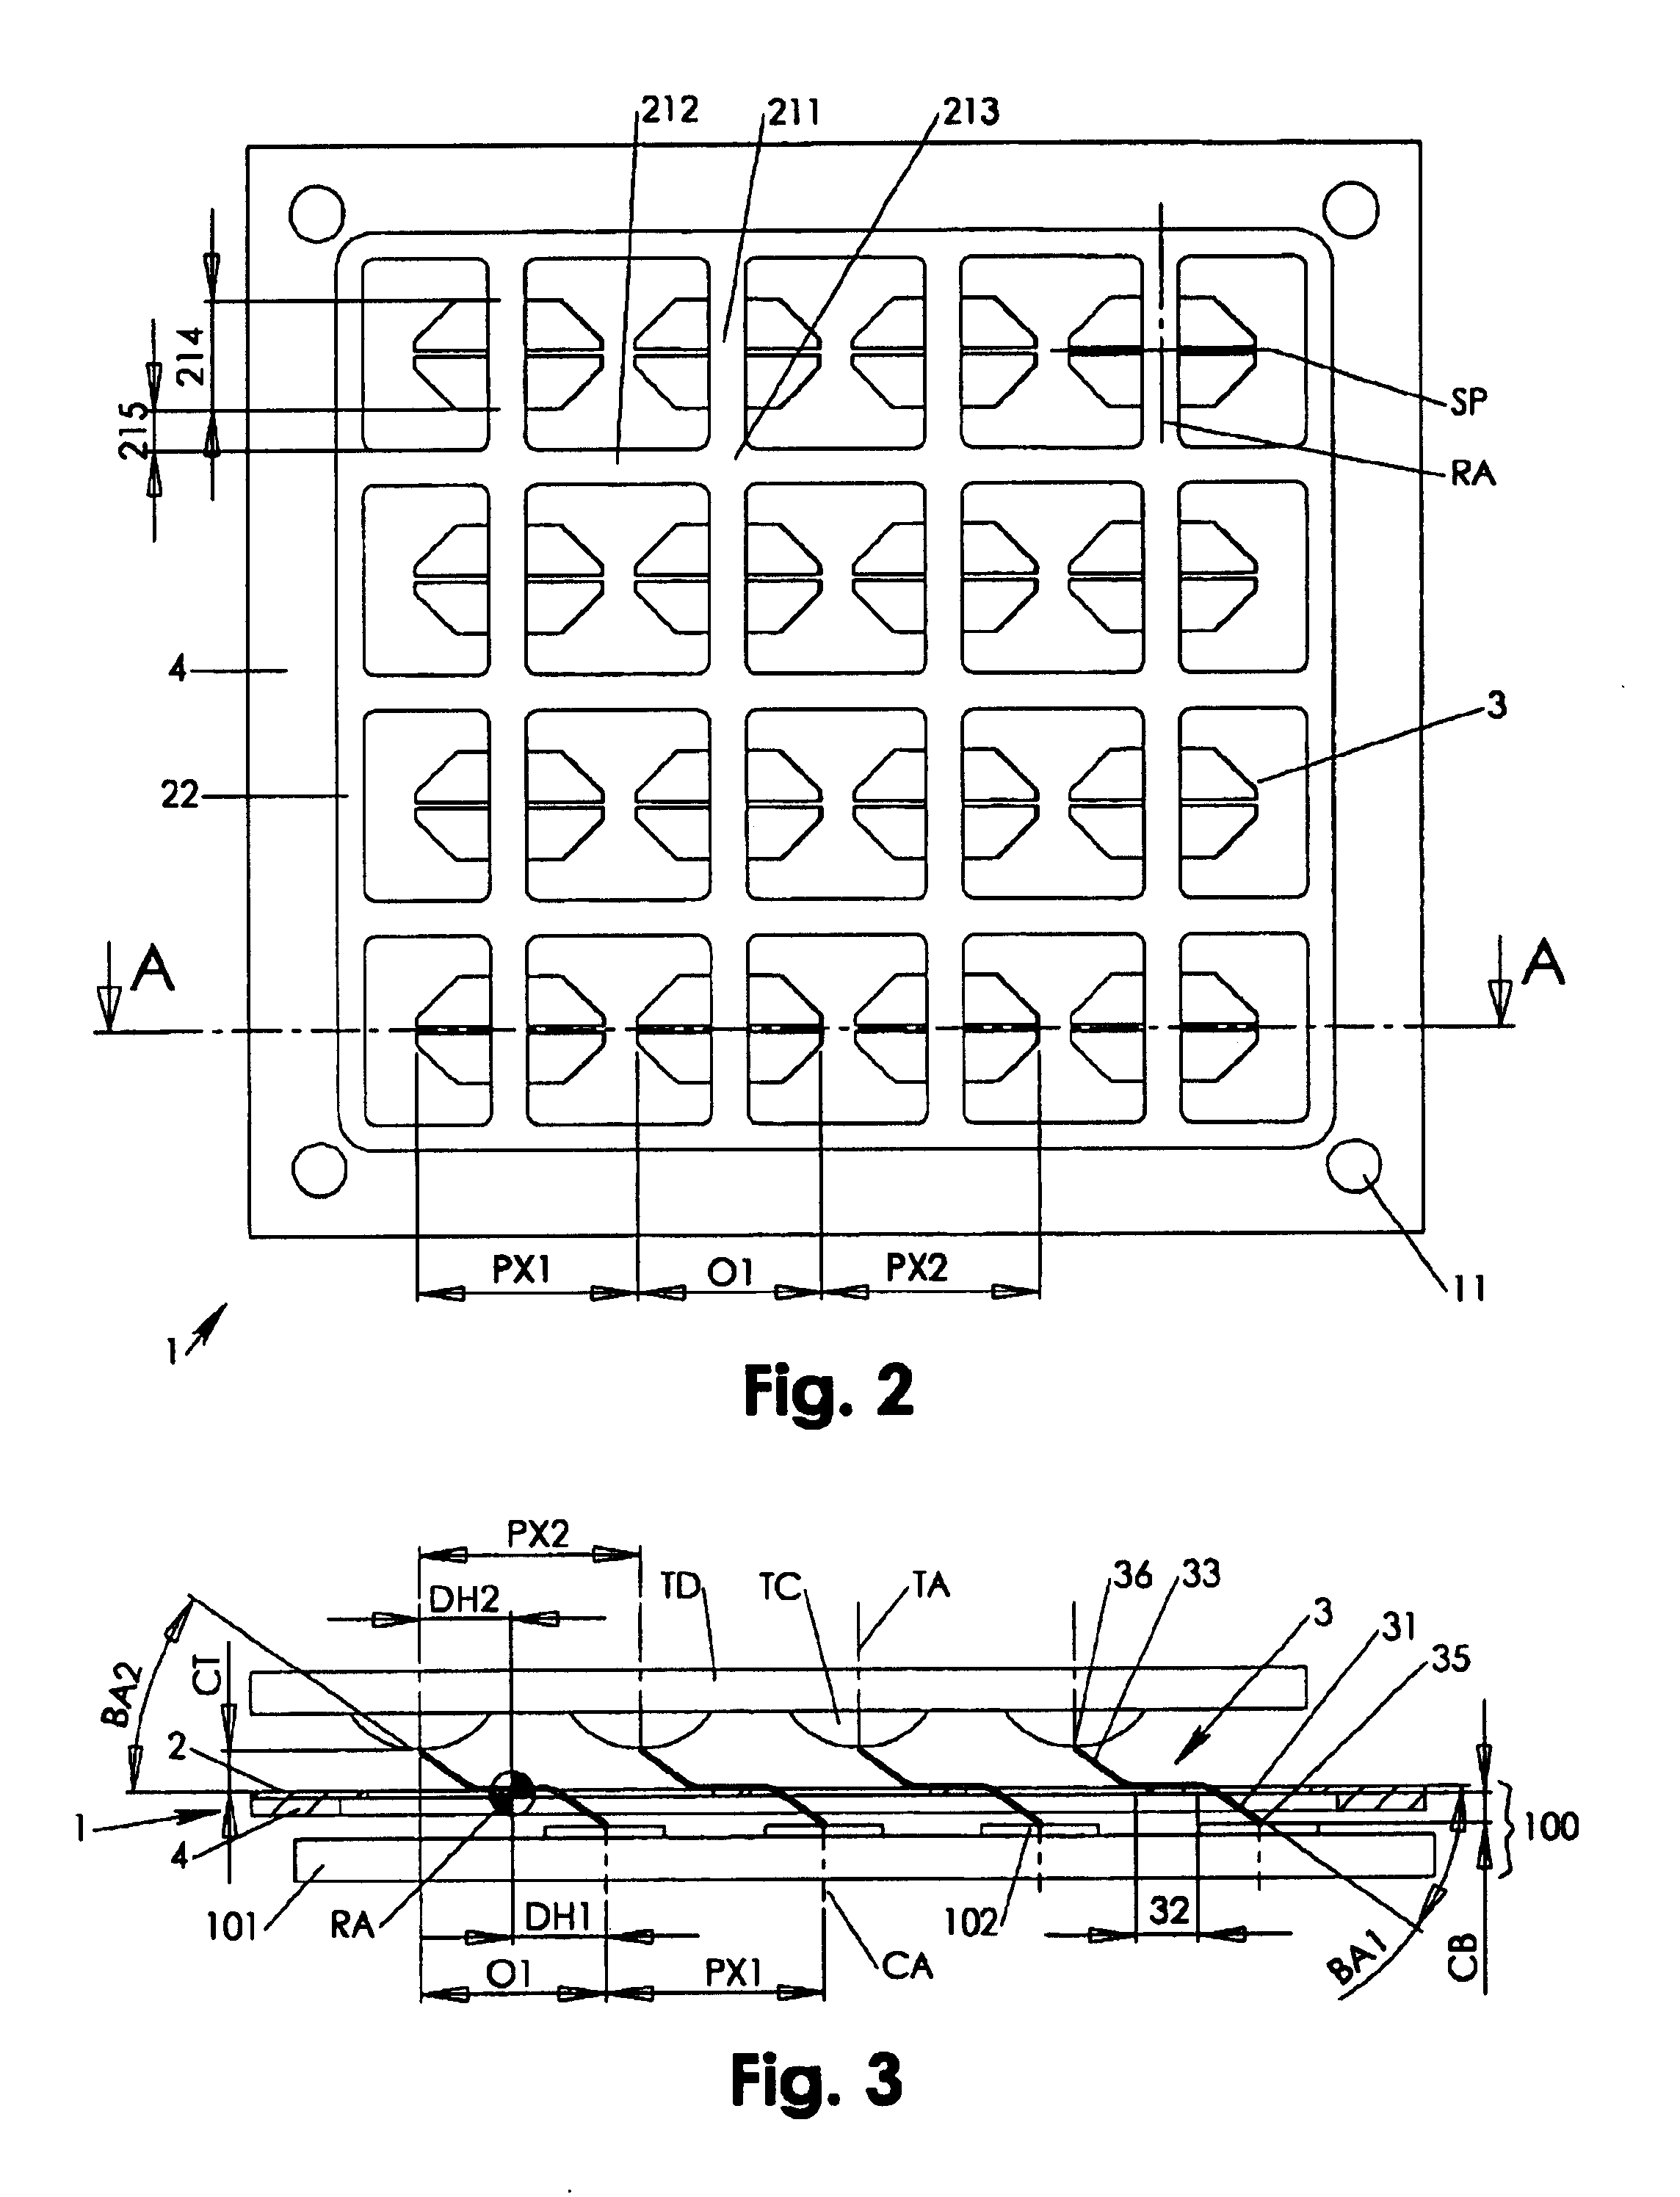 See-saw interconnect assembly with dielectric carrier grid providing spring suspension